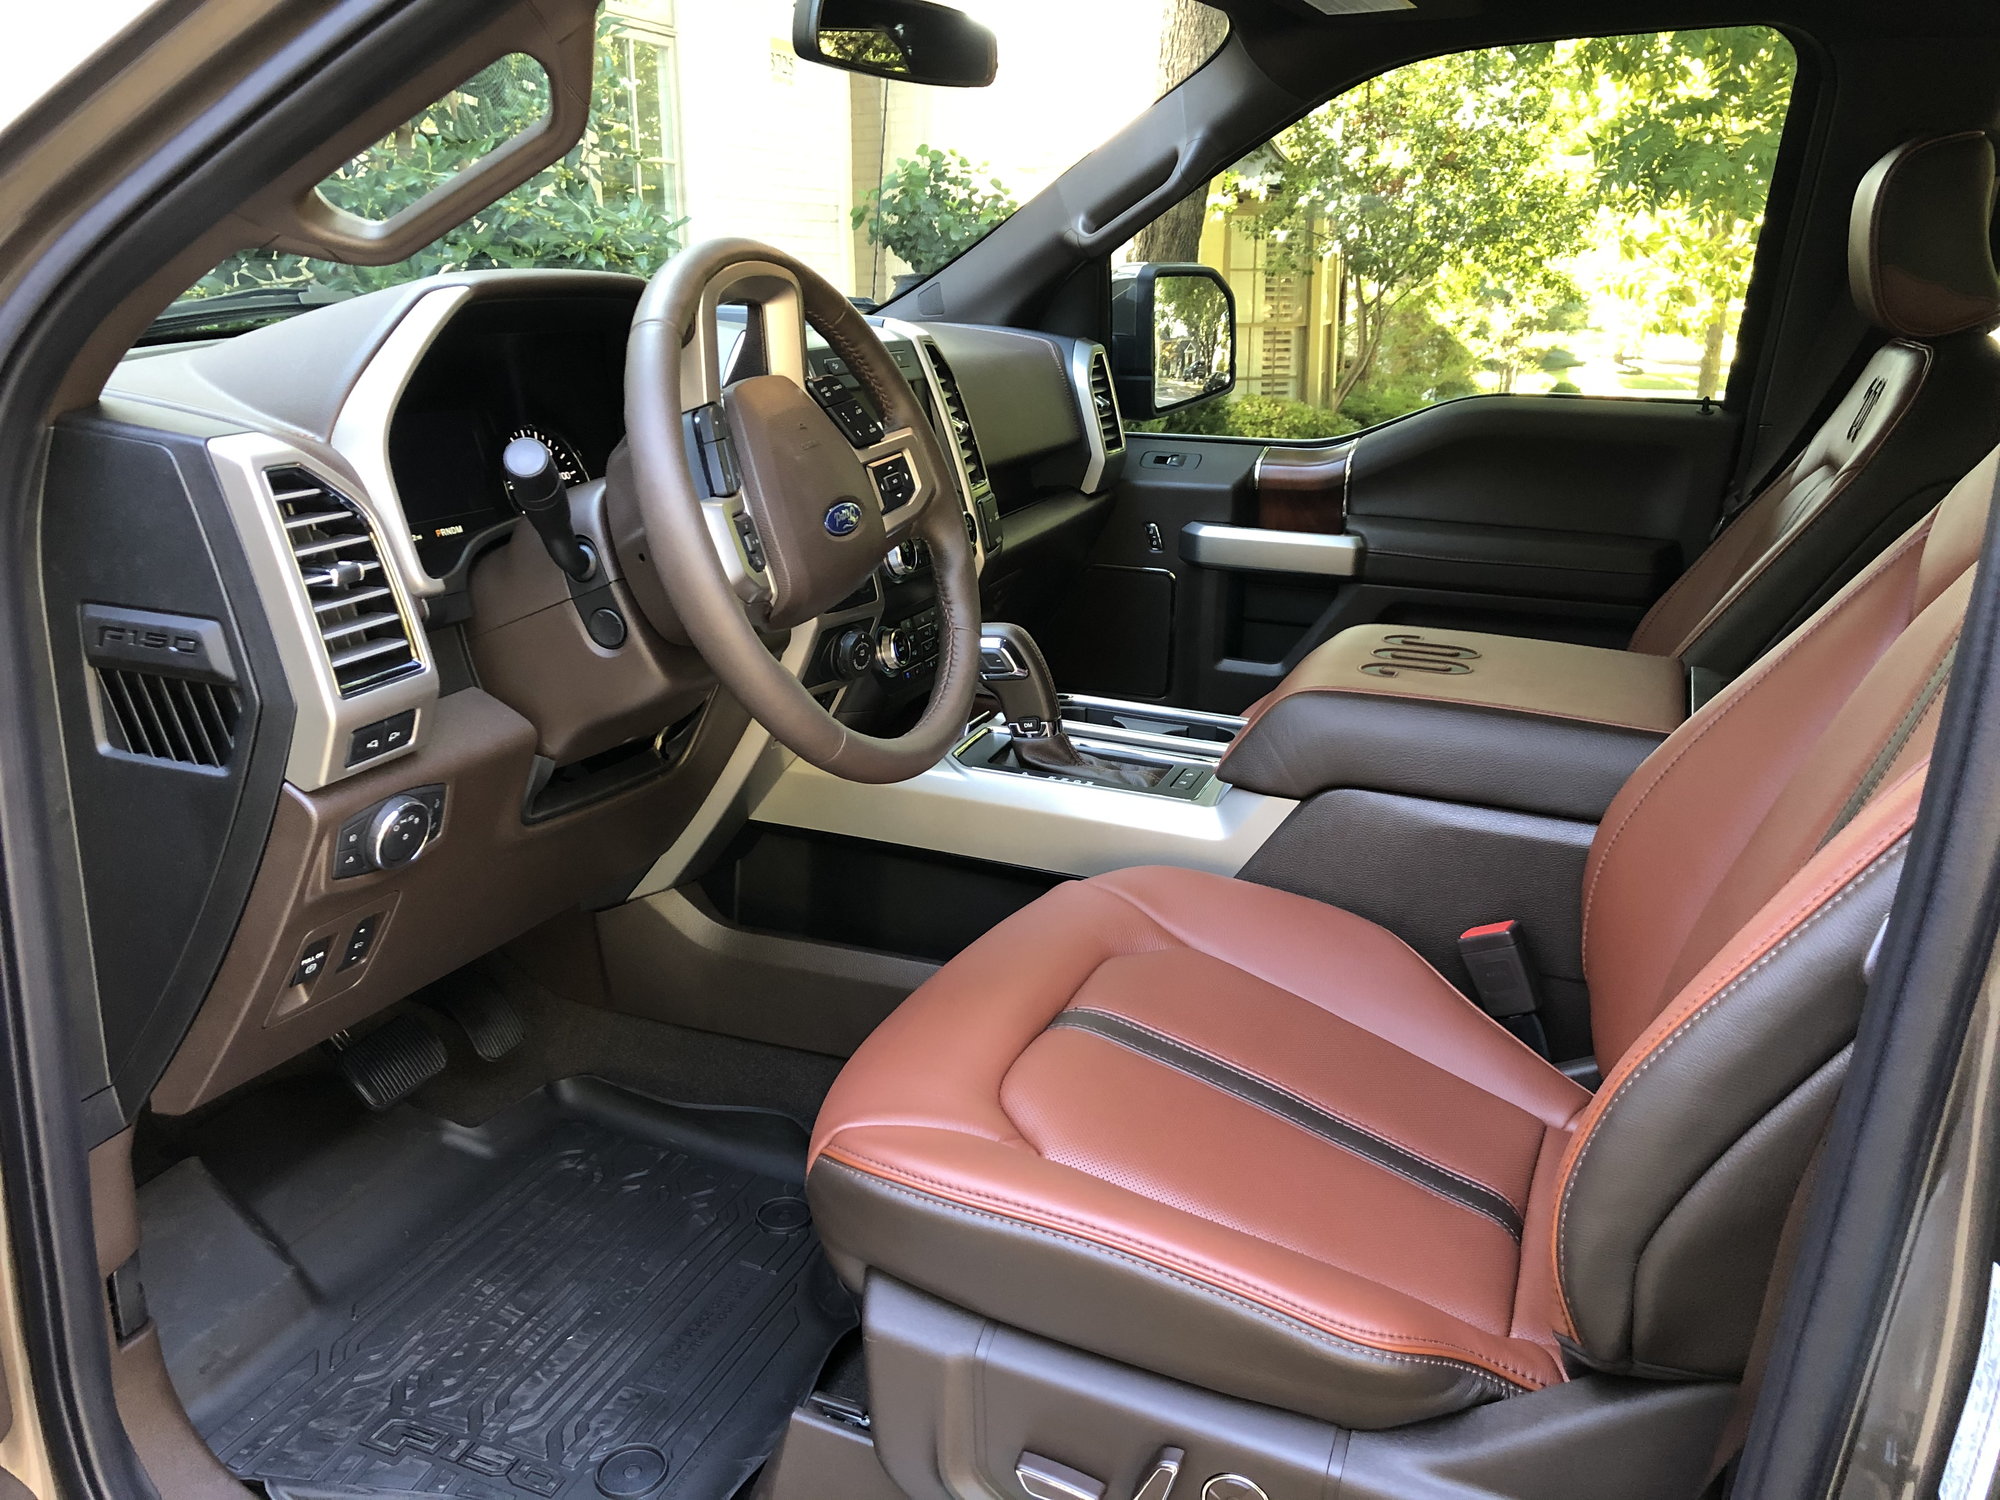 2019 Stone Gray King Ranch Ford F150 Forum Community Of